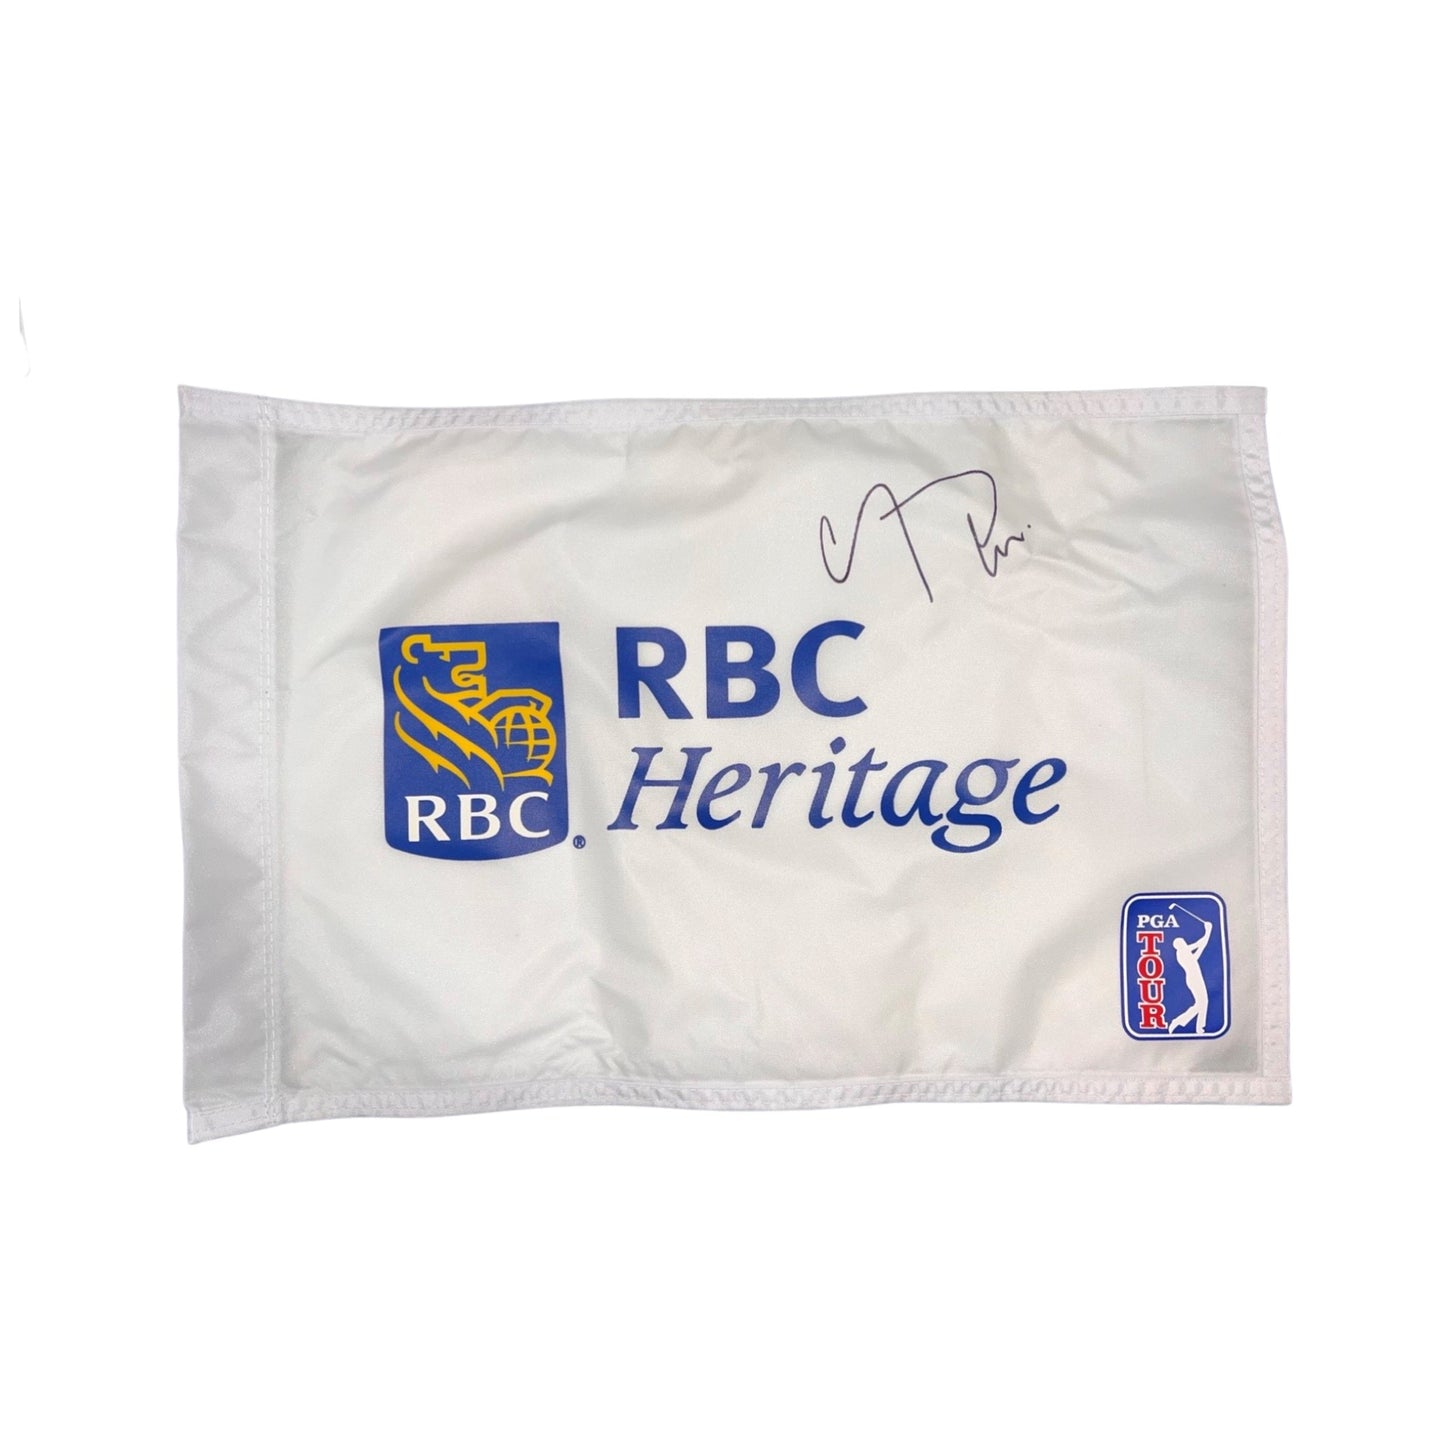 RBC Heritage PGA TOUR Game Used Flag - Signed by C.T. Pan 2019